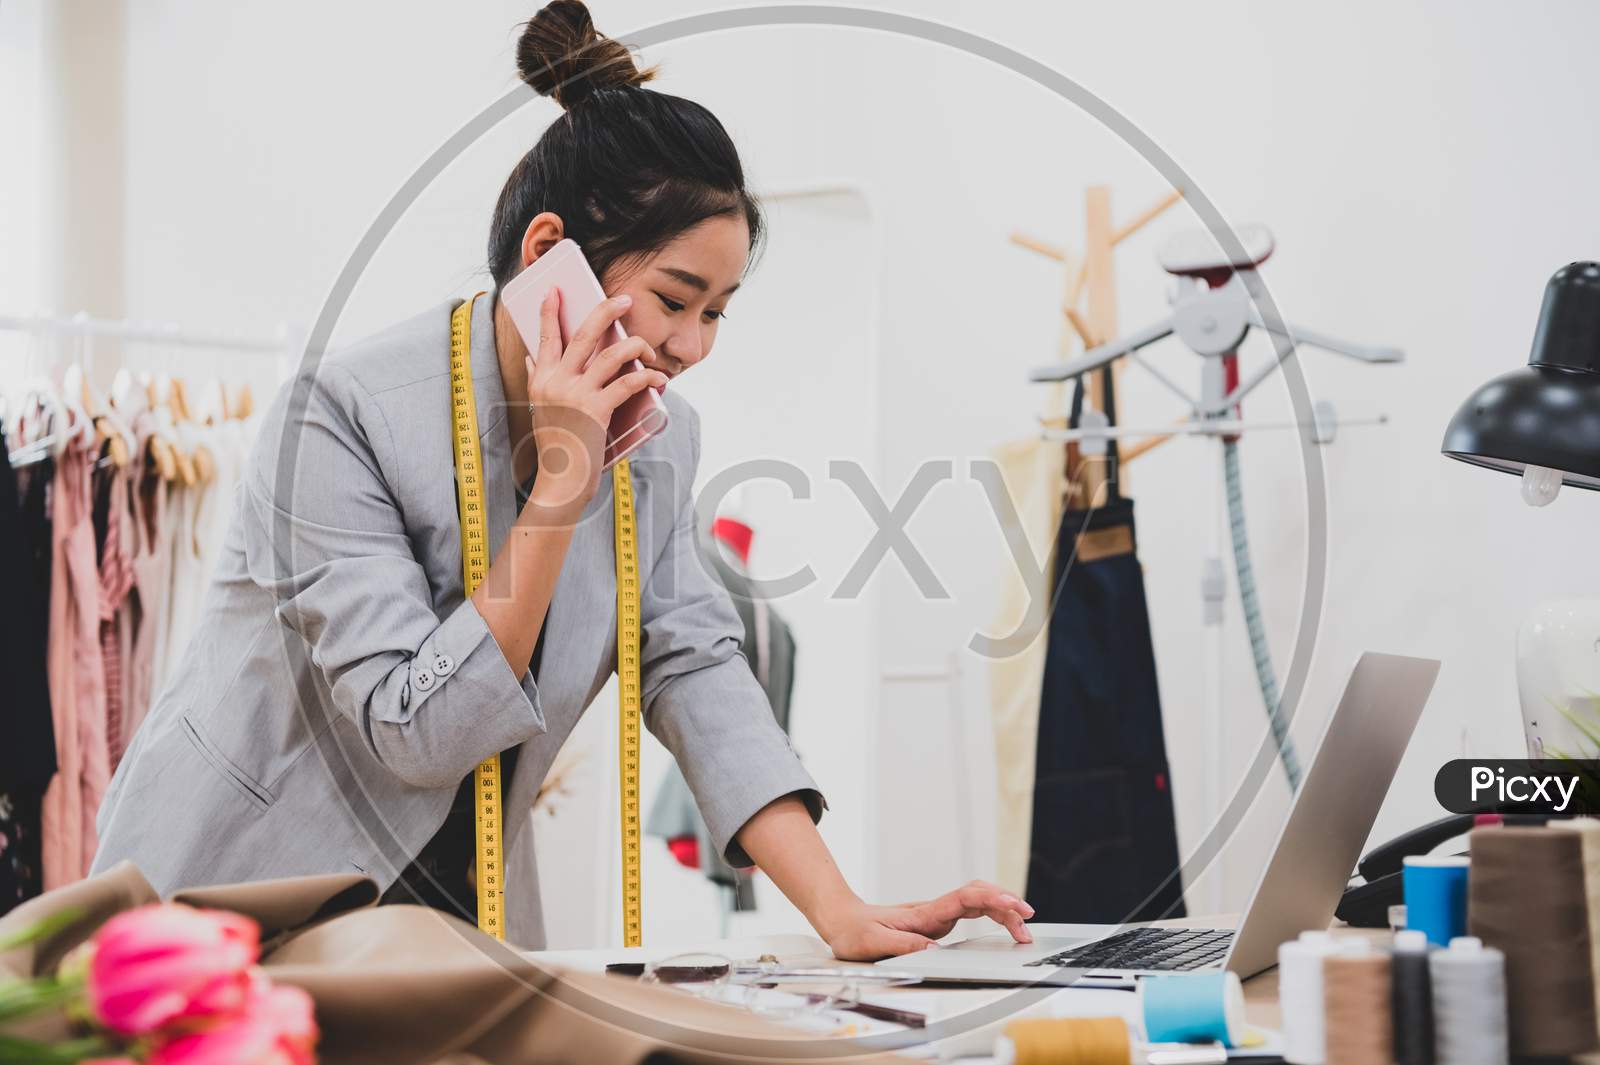 Attractive Asian Female Fashion Designer Working In Clothing Shop Studio And Using Mobile Phone To Contact Customer. Woman Receiving Order From Incoming Call. Tailor Sewing. People Lifestyle Concept